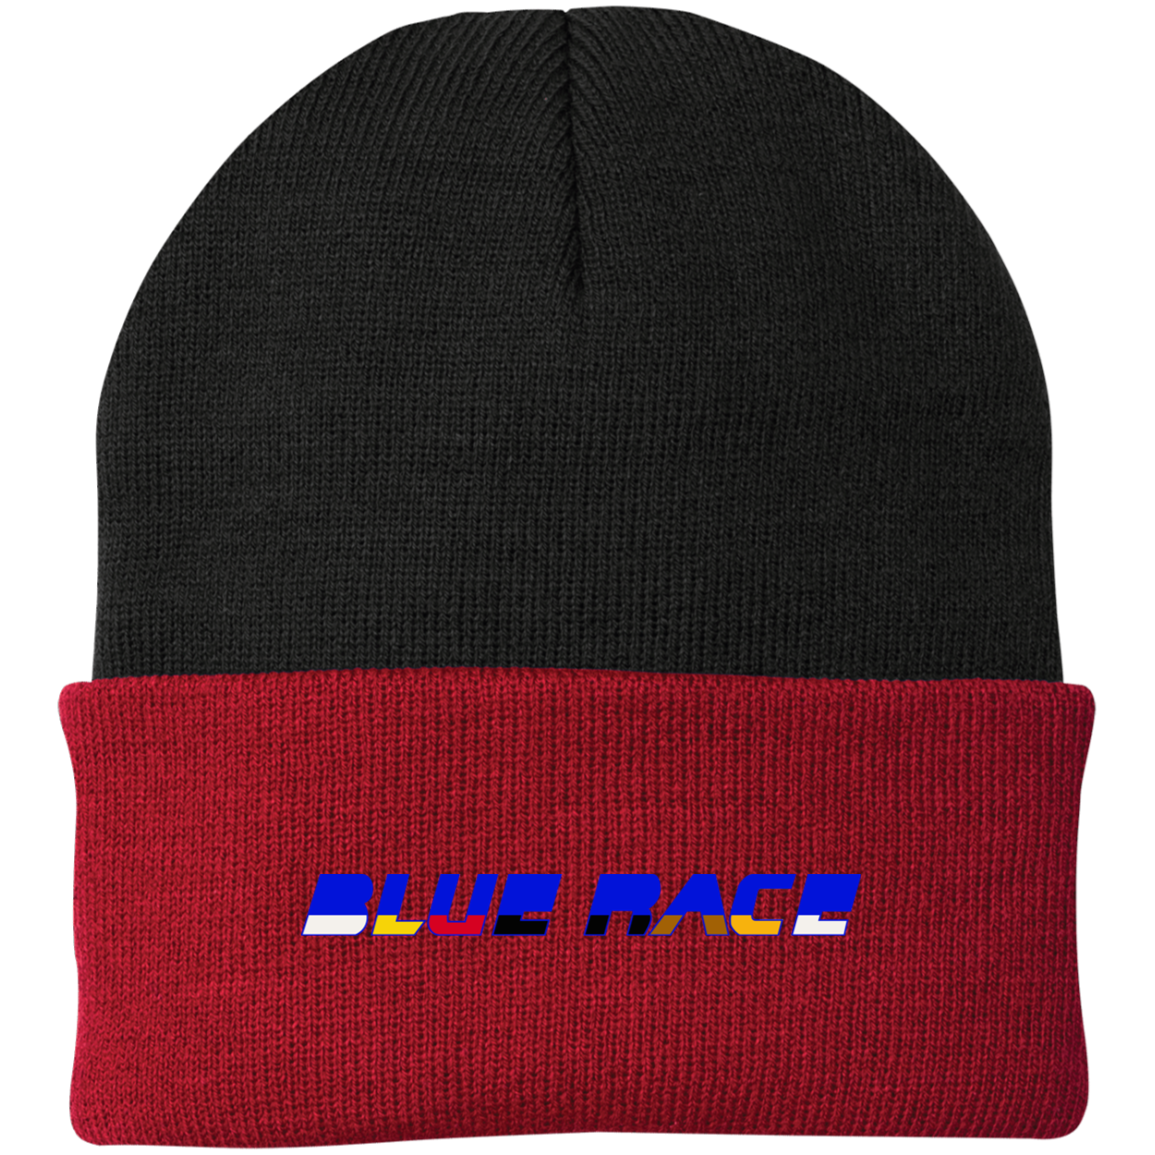 Embroidered Knit Cap